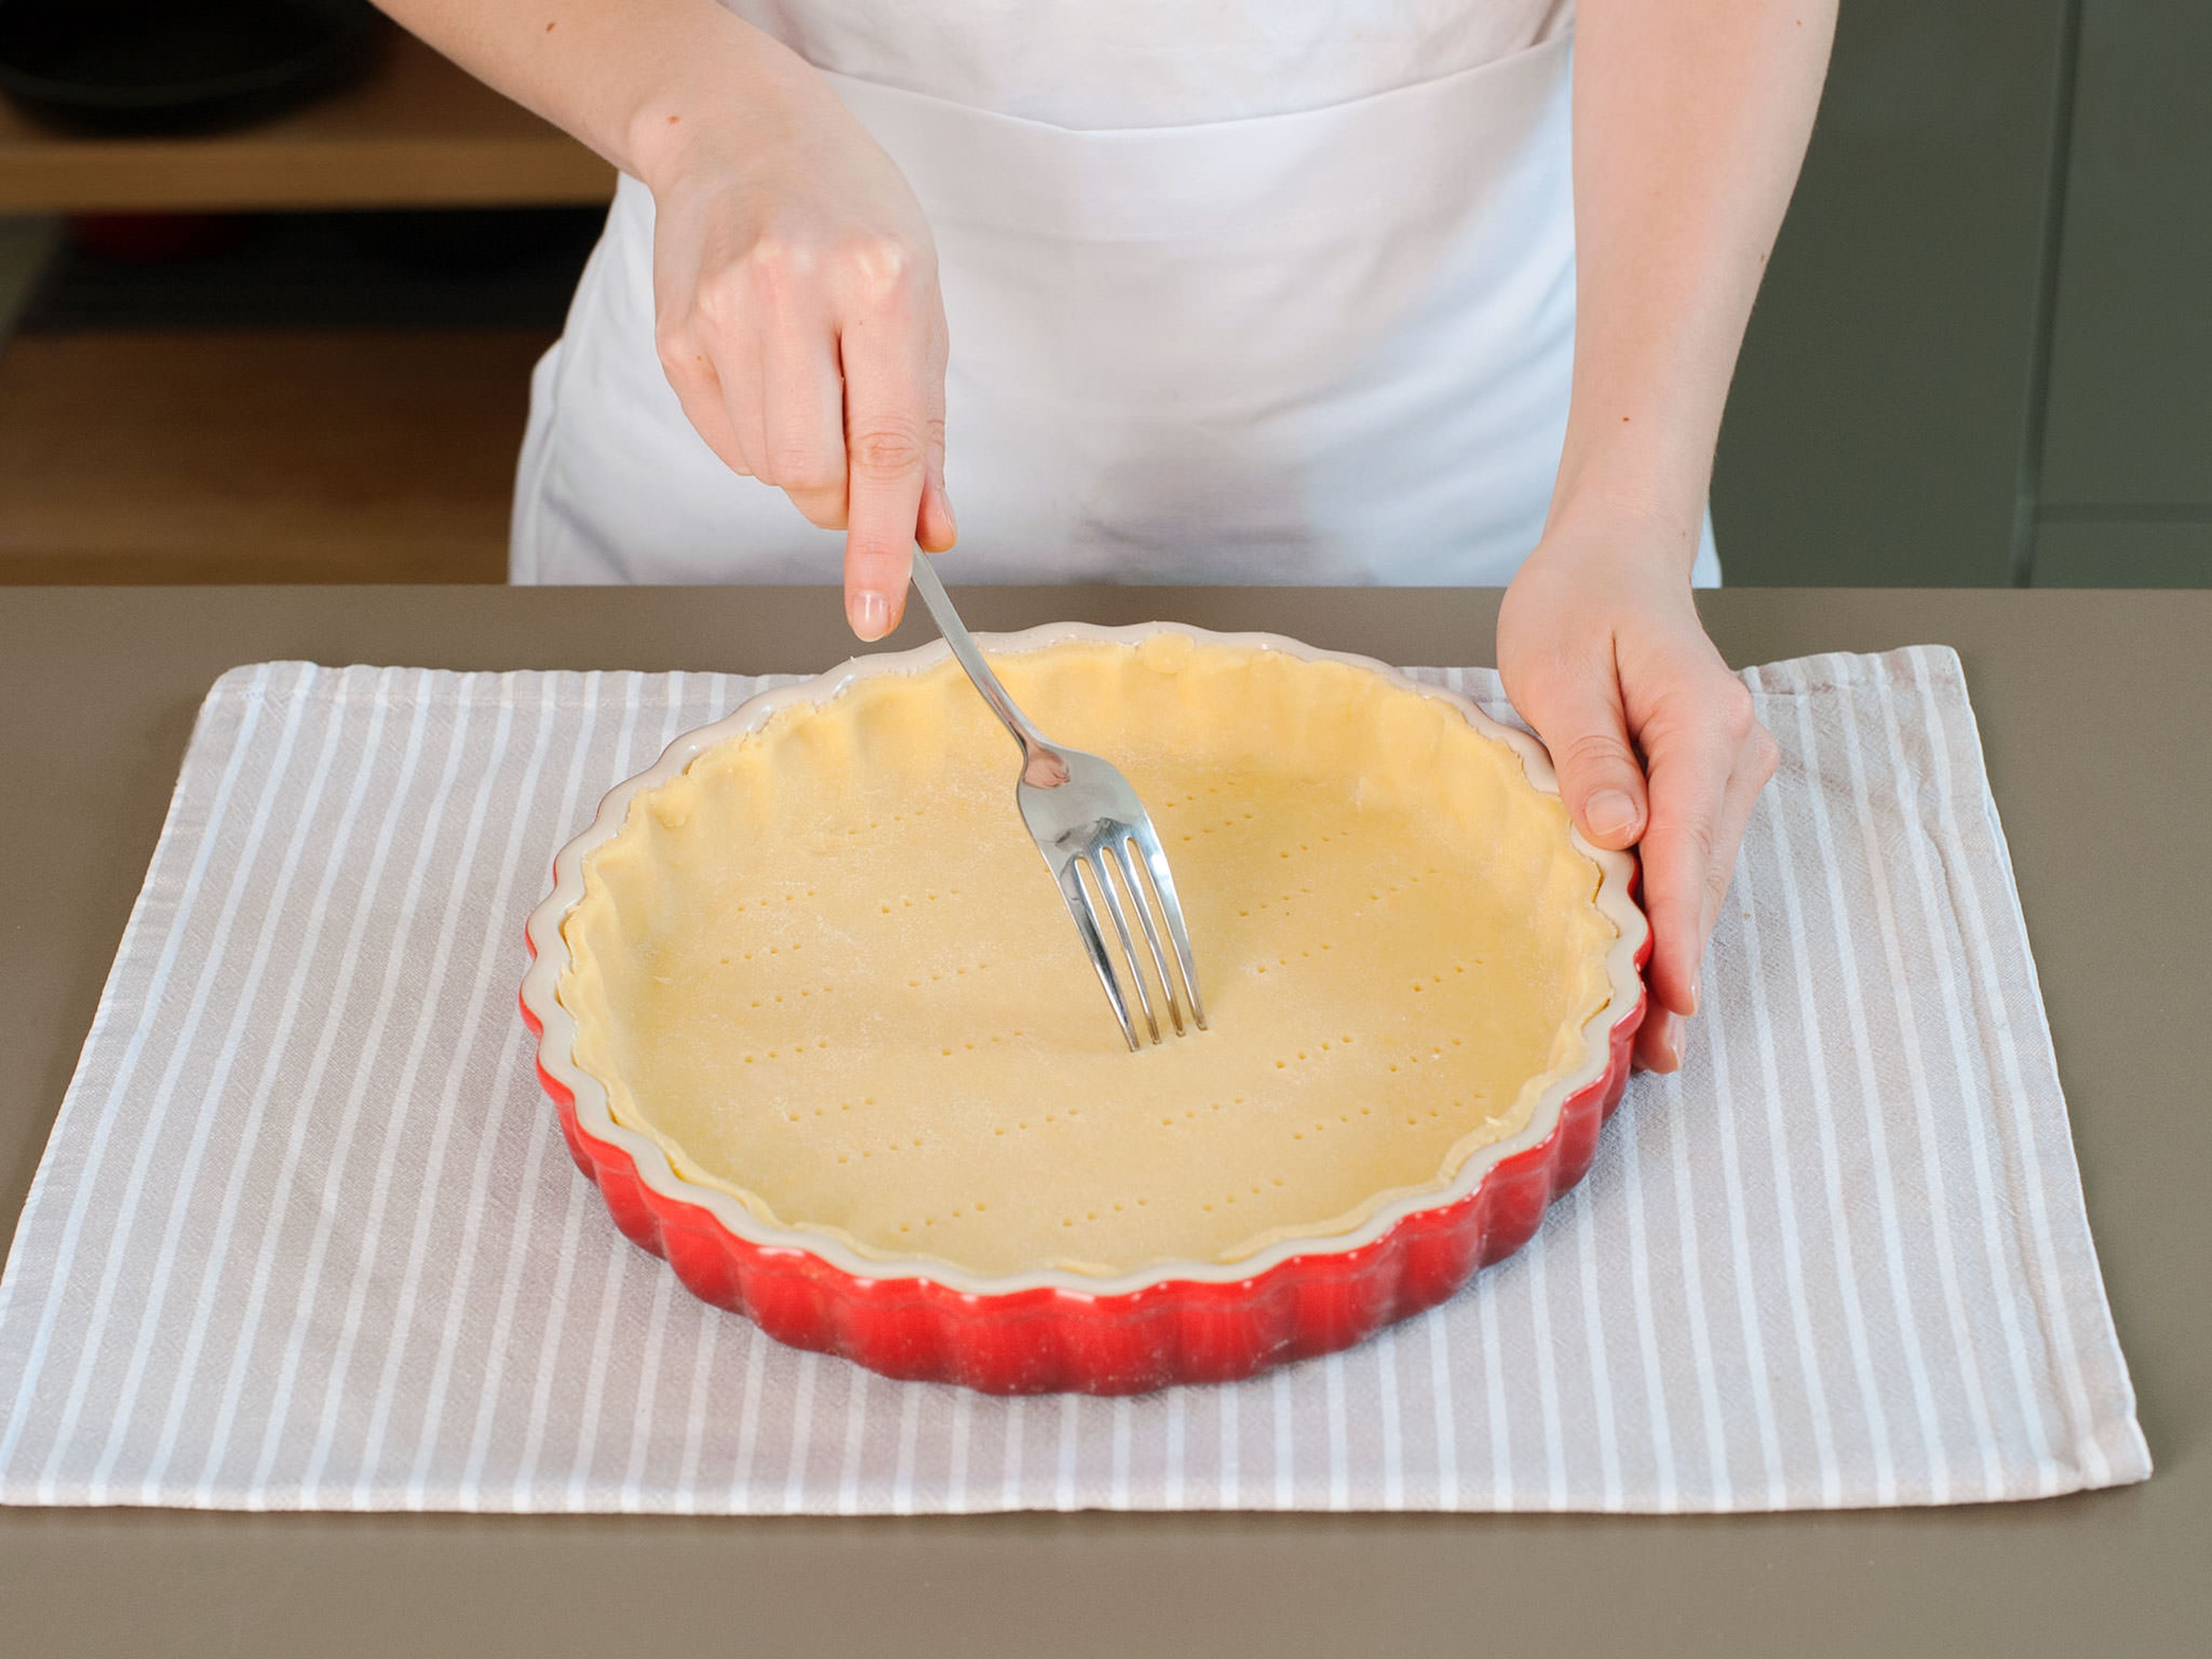 Preheat oven to 180°C/350°F. Roll out dough, gently press into a greased pie dish, and poke with a fork.